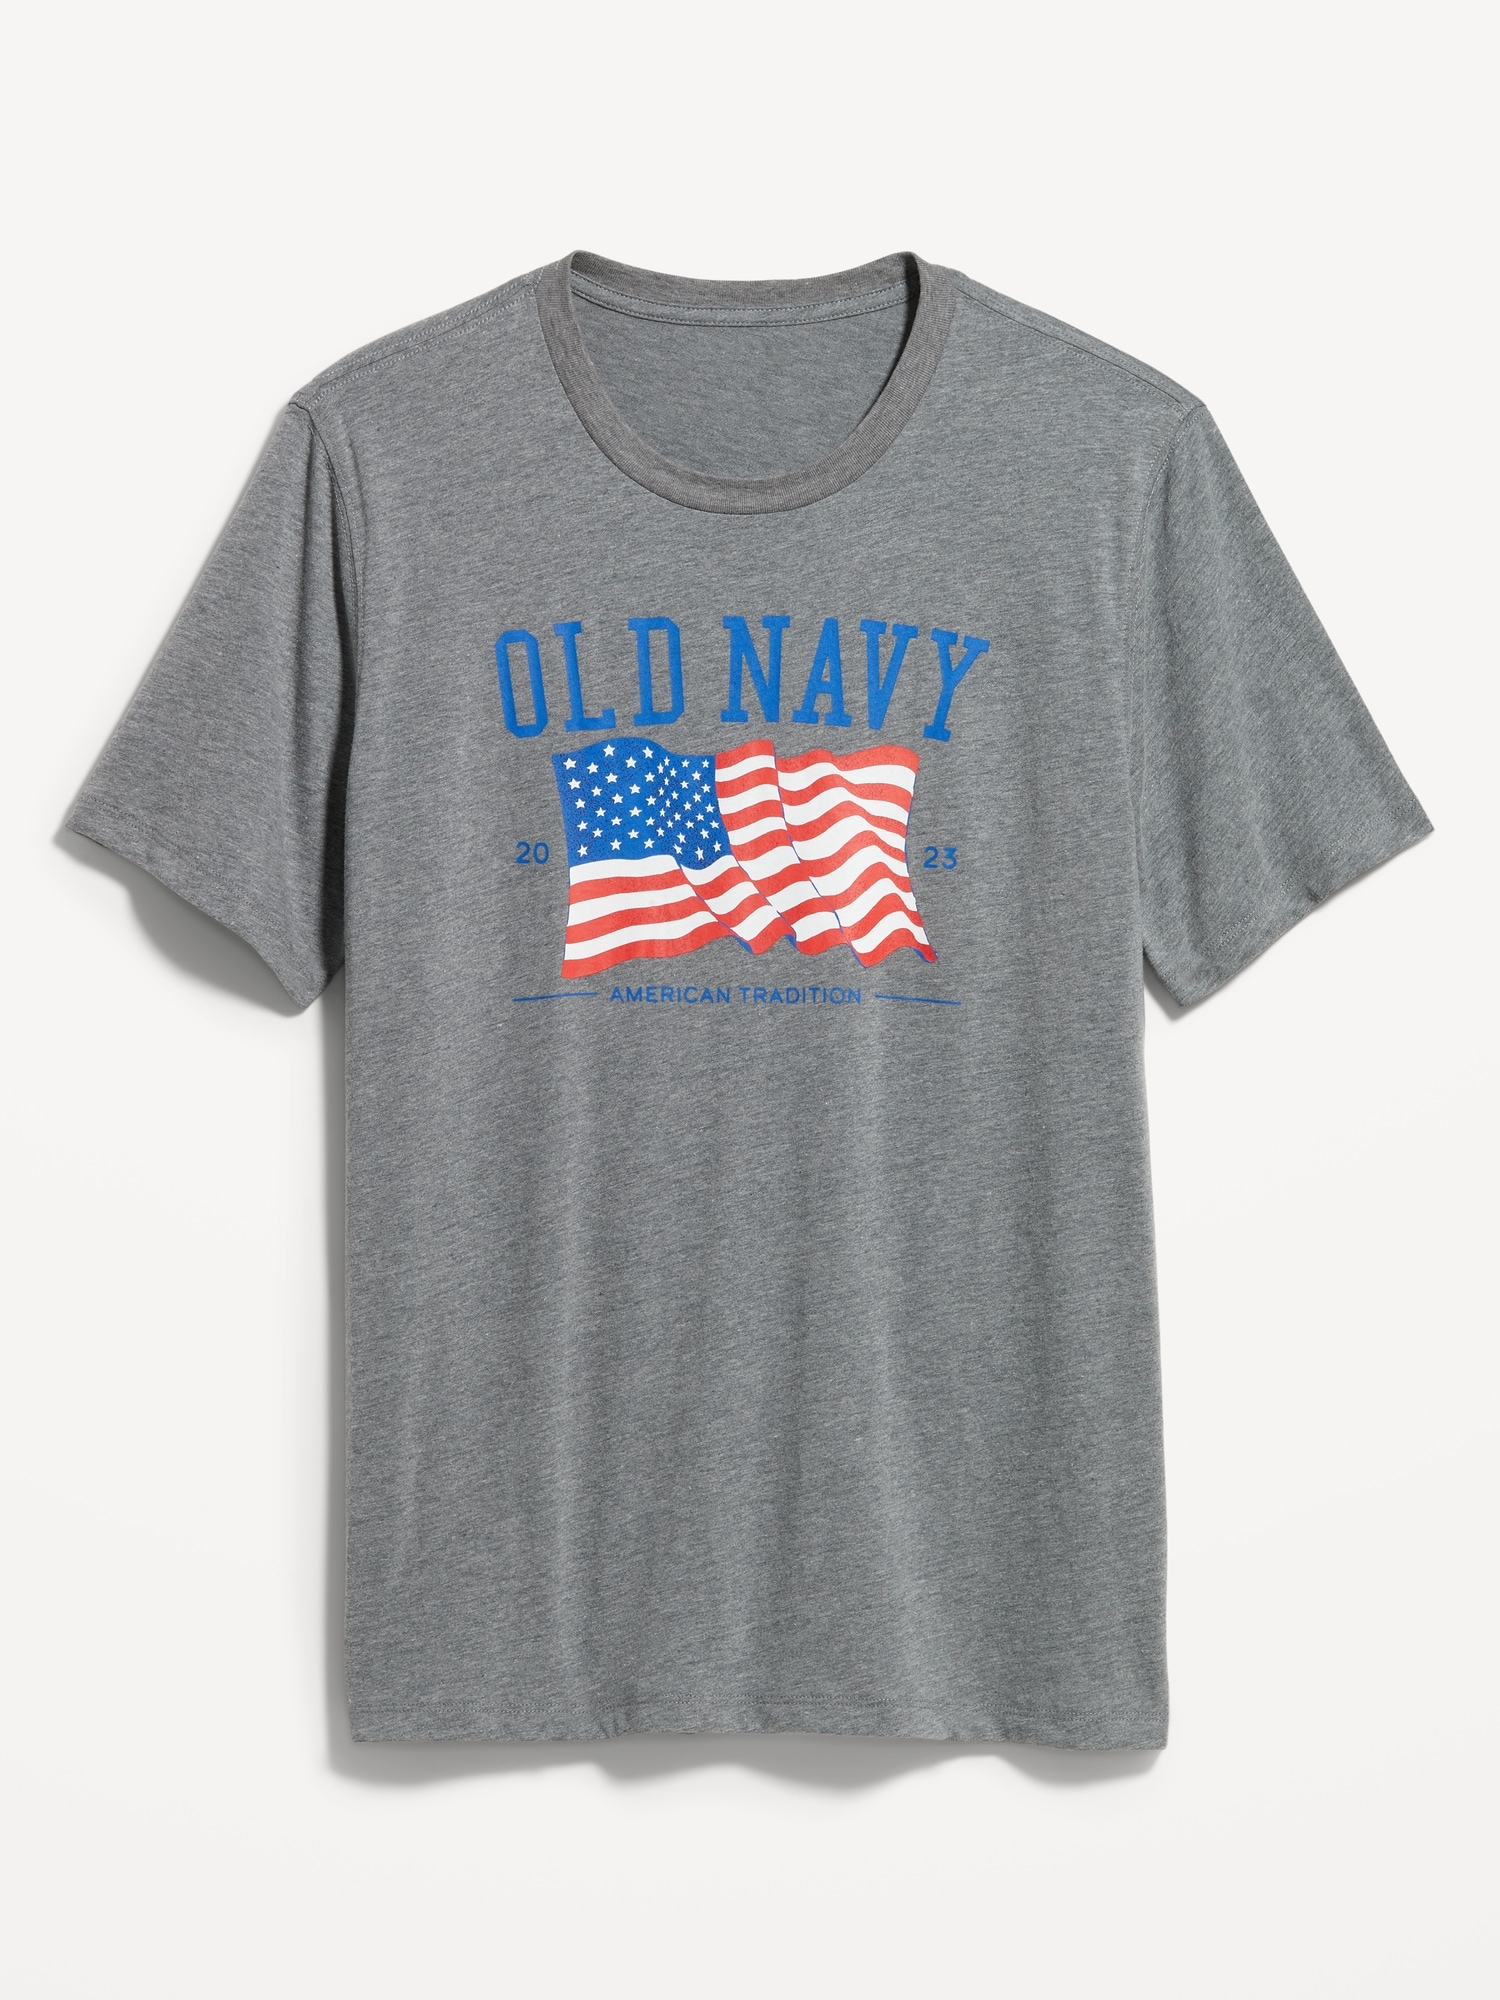 Old Navy Matching "Old Navy" Flag Graphic T-Shirt for Men gray. 1